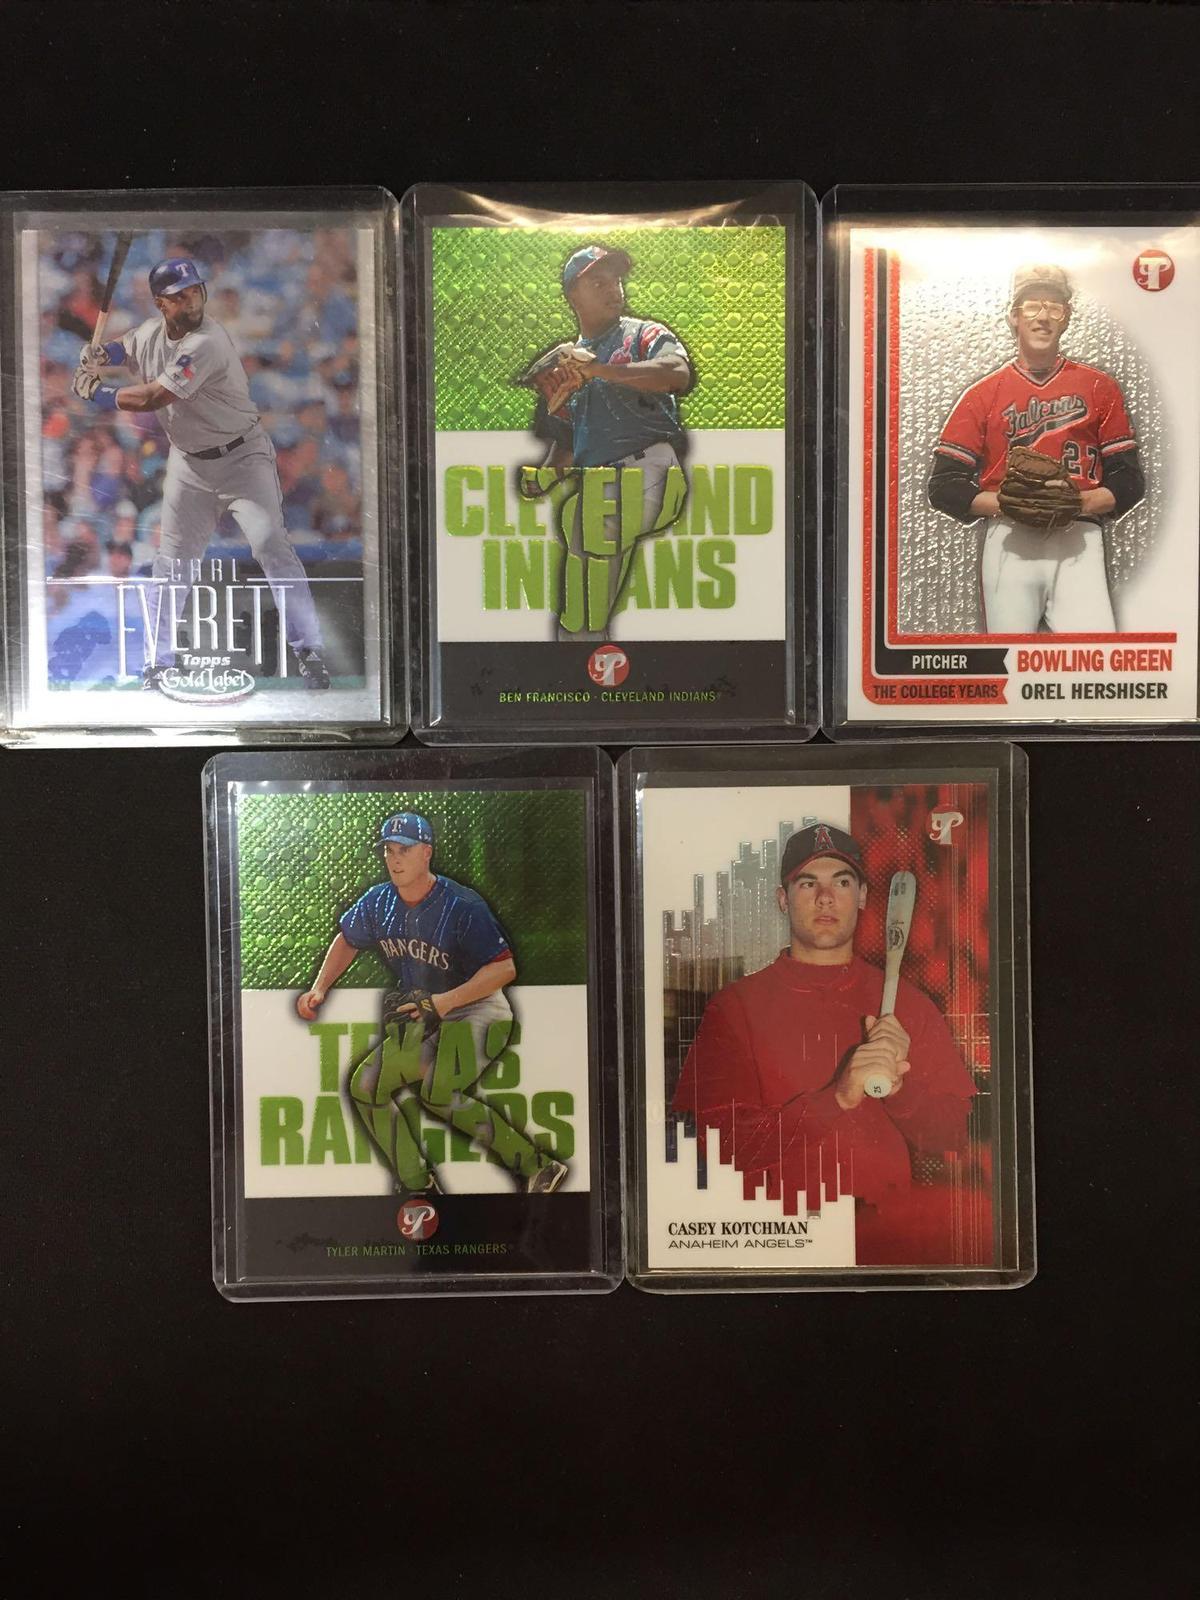 5 Card Lot of Baseball Serial Numbered Inserts, Rare Cards, Star Cards! Awesome!